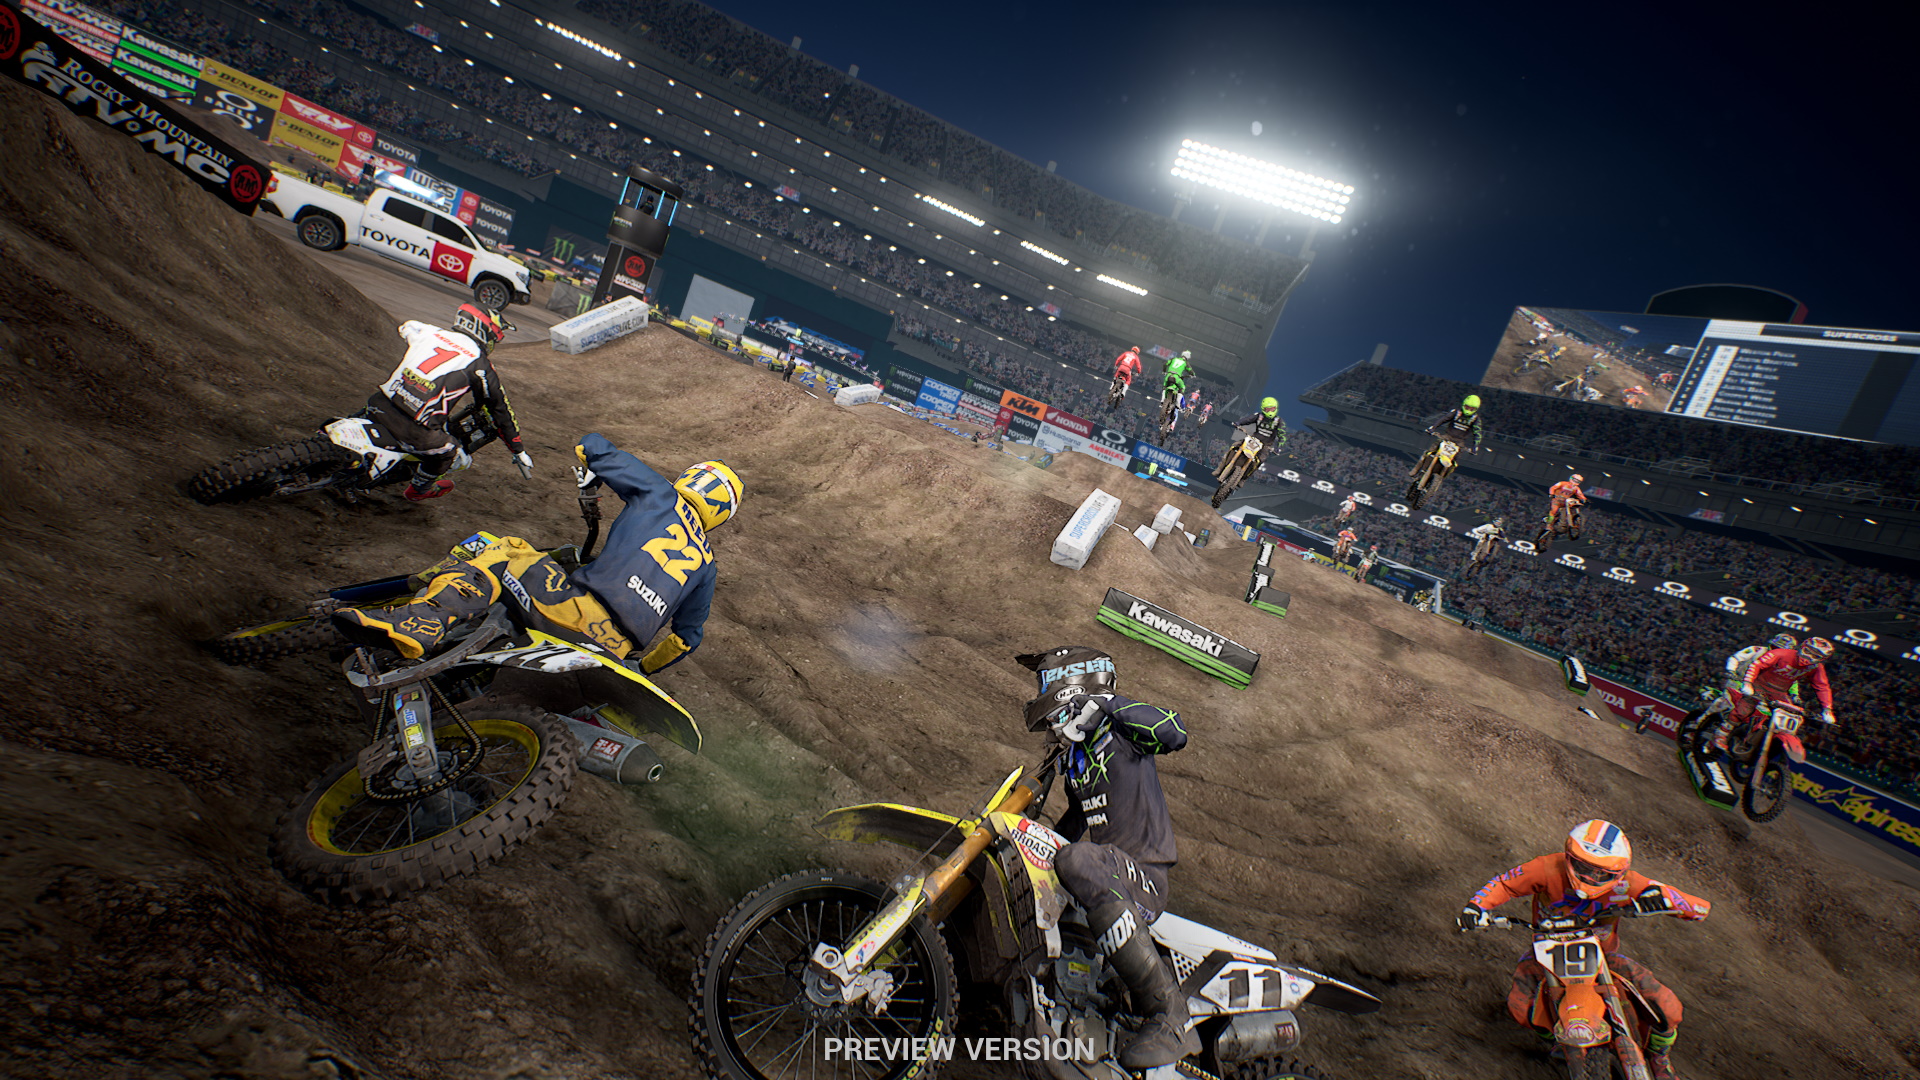 A screenshot from the preview build of Monster Energy Supercross 3